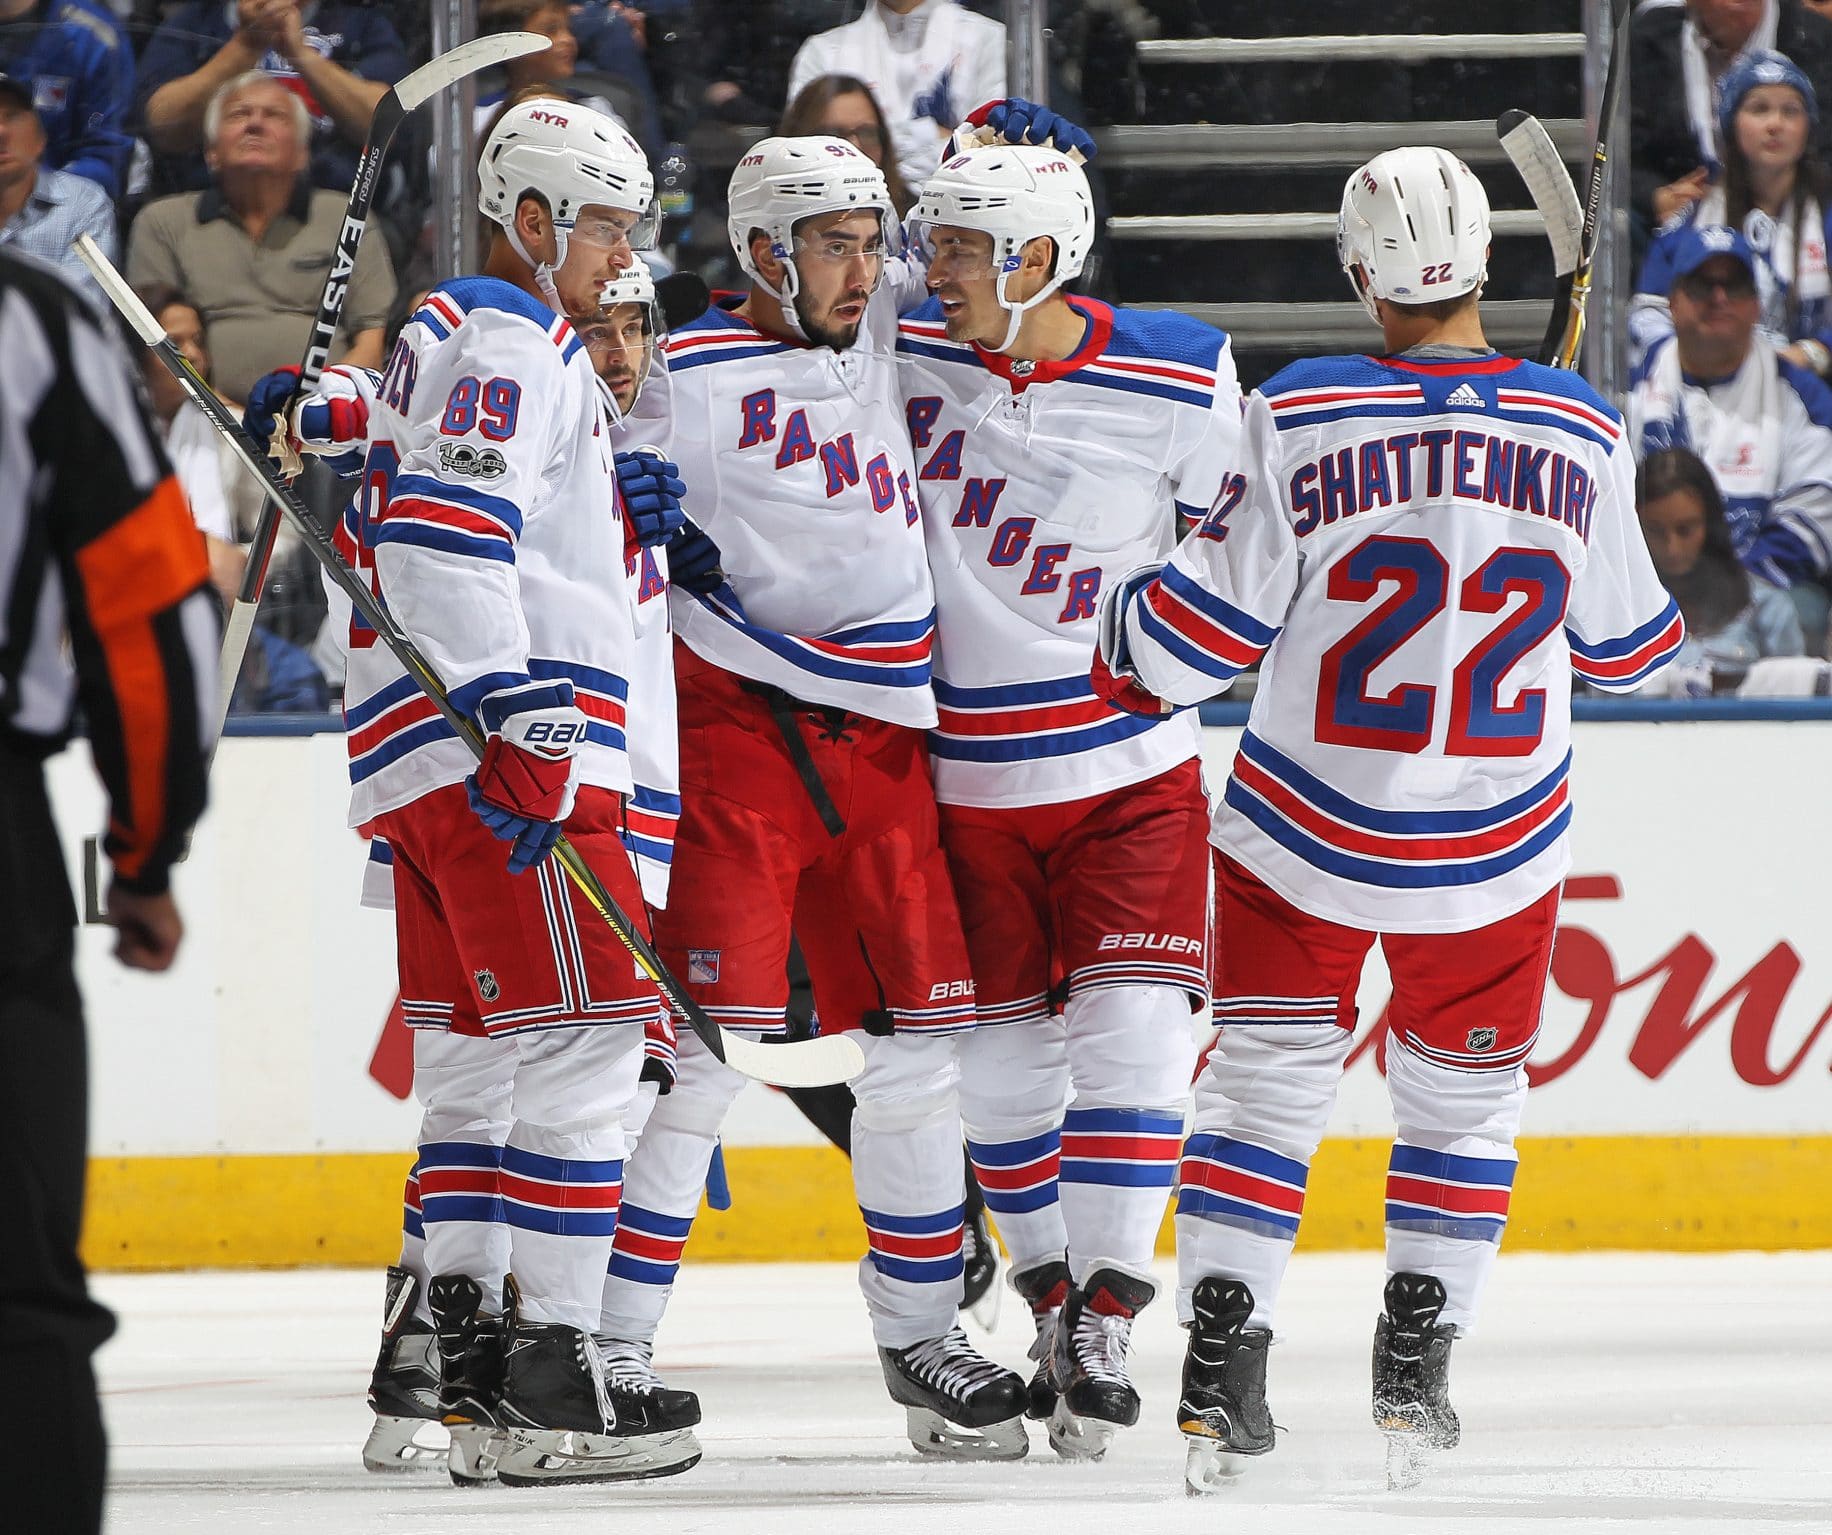 Paging Dr. Puck: Diagnosing What Is Wrong With The New York Rangers 3